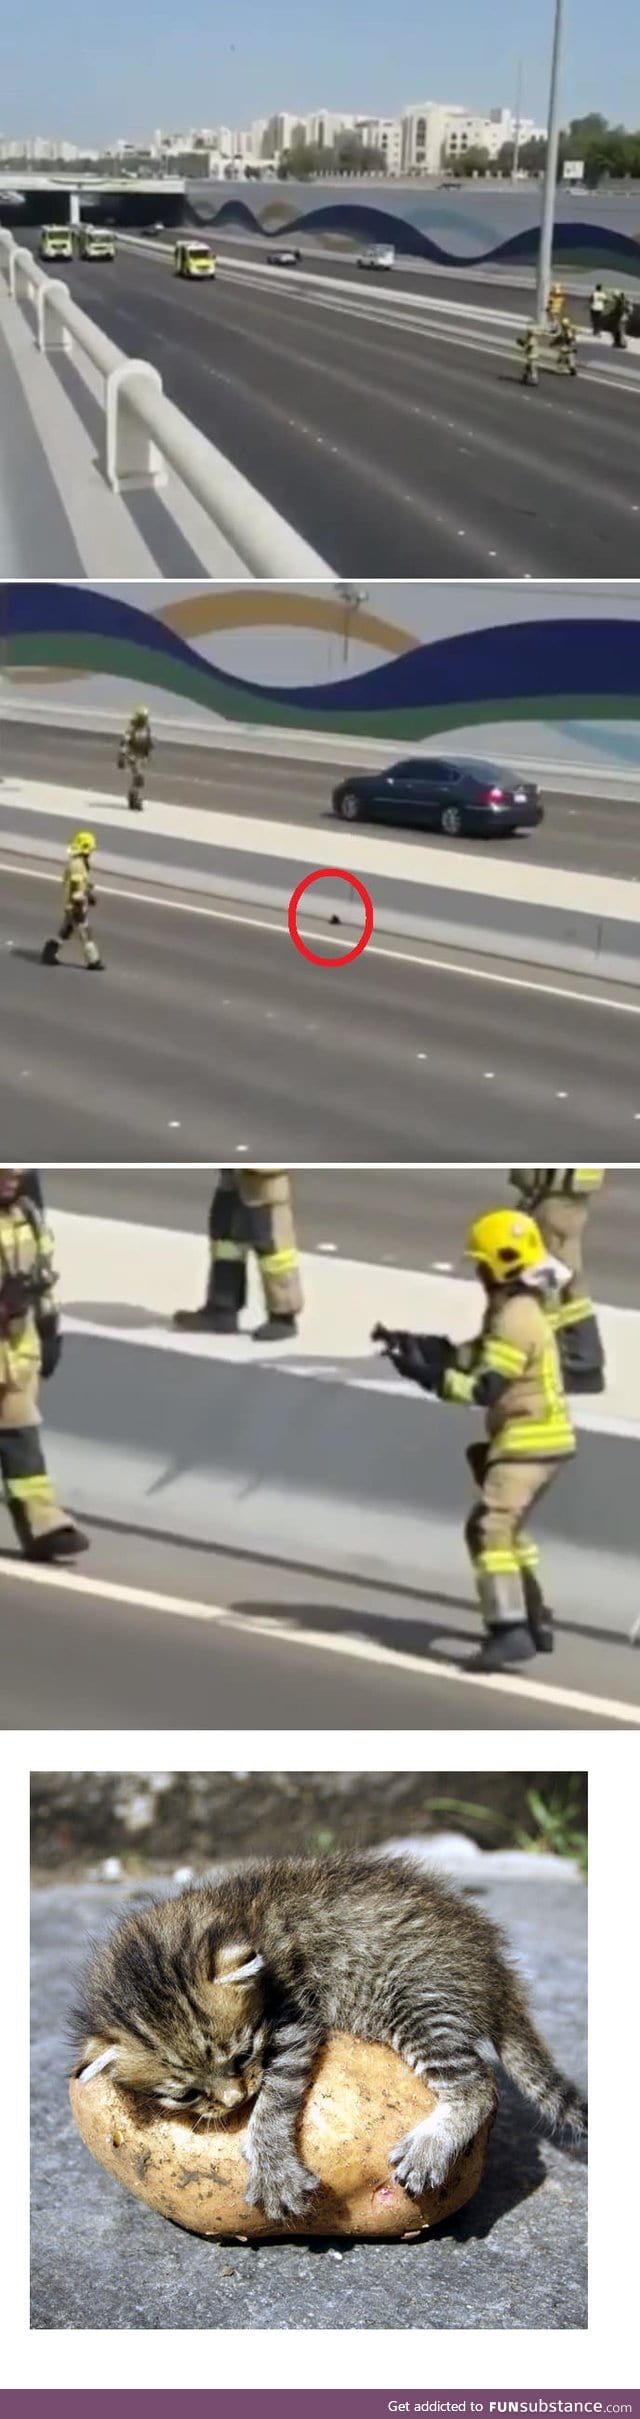 Abu Dhabi fire-department blocked the highway to rescue a cat